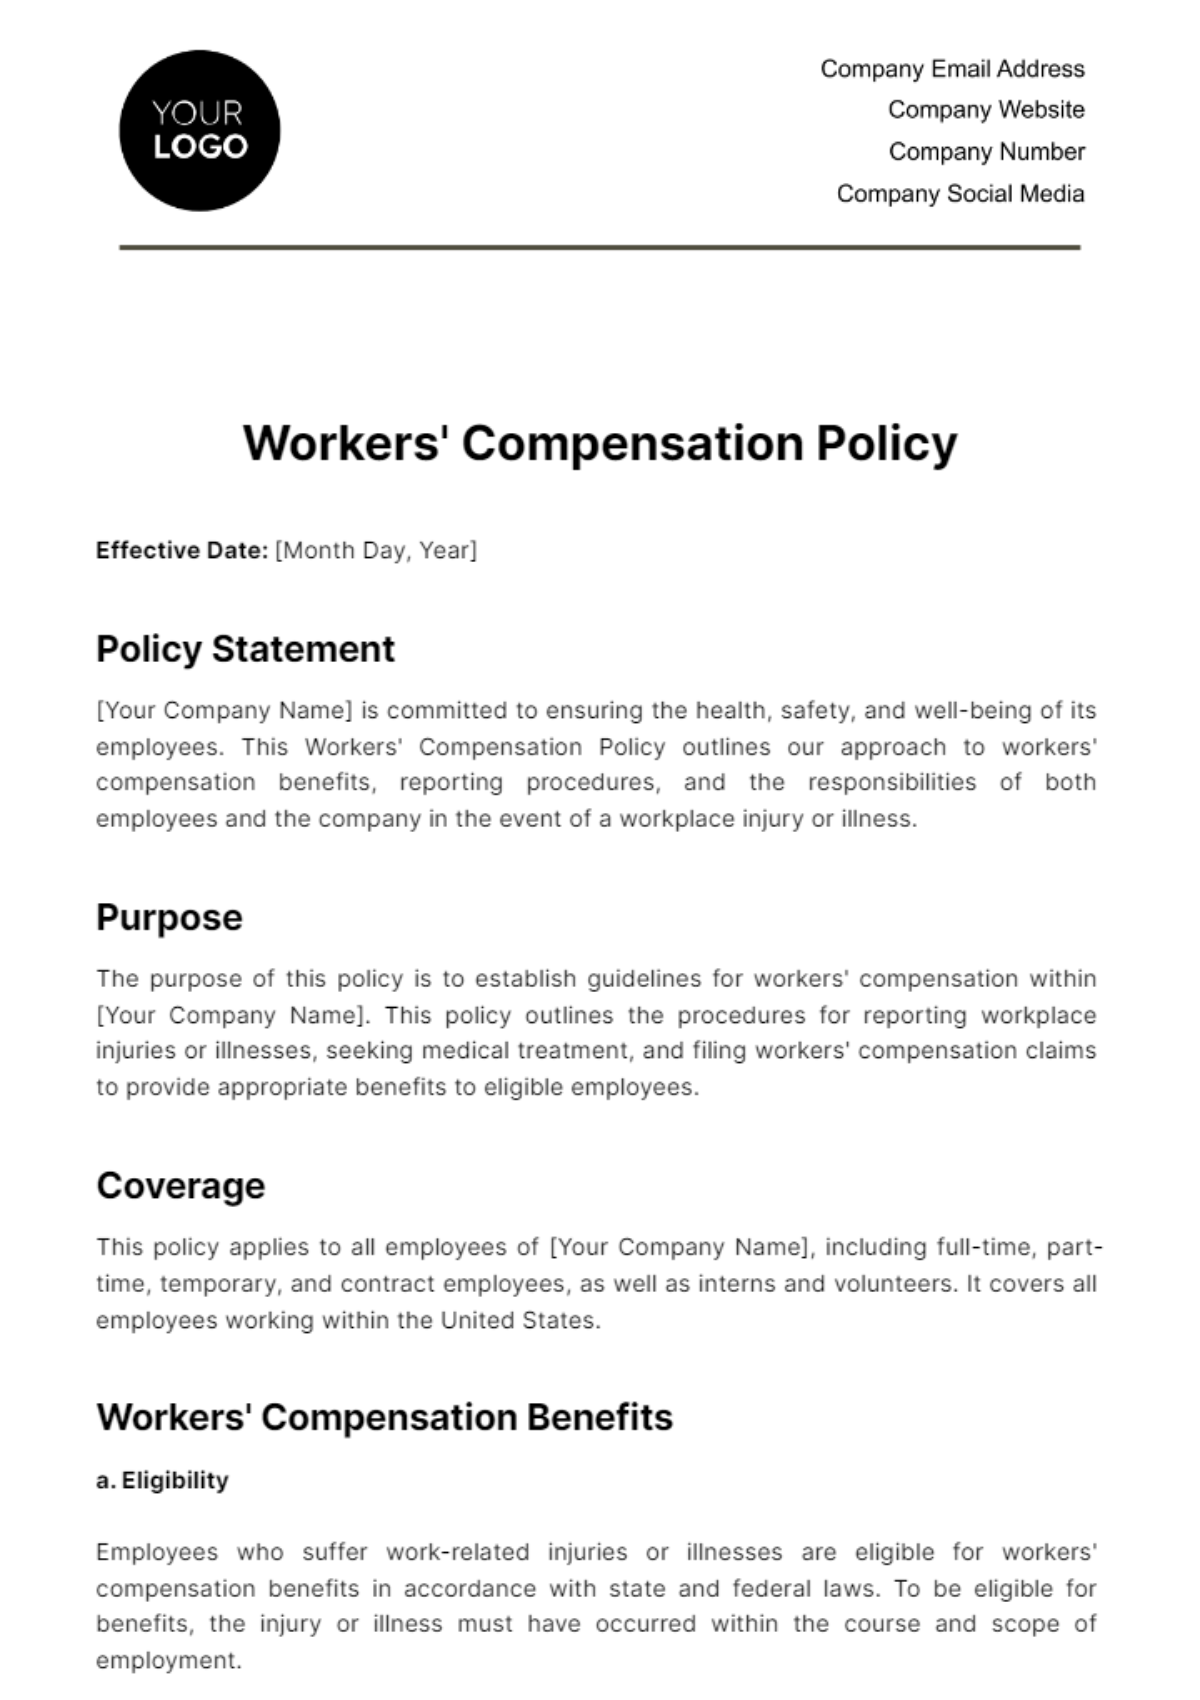 Free Workers' Compensation Policy HR Template